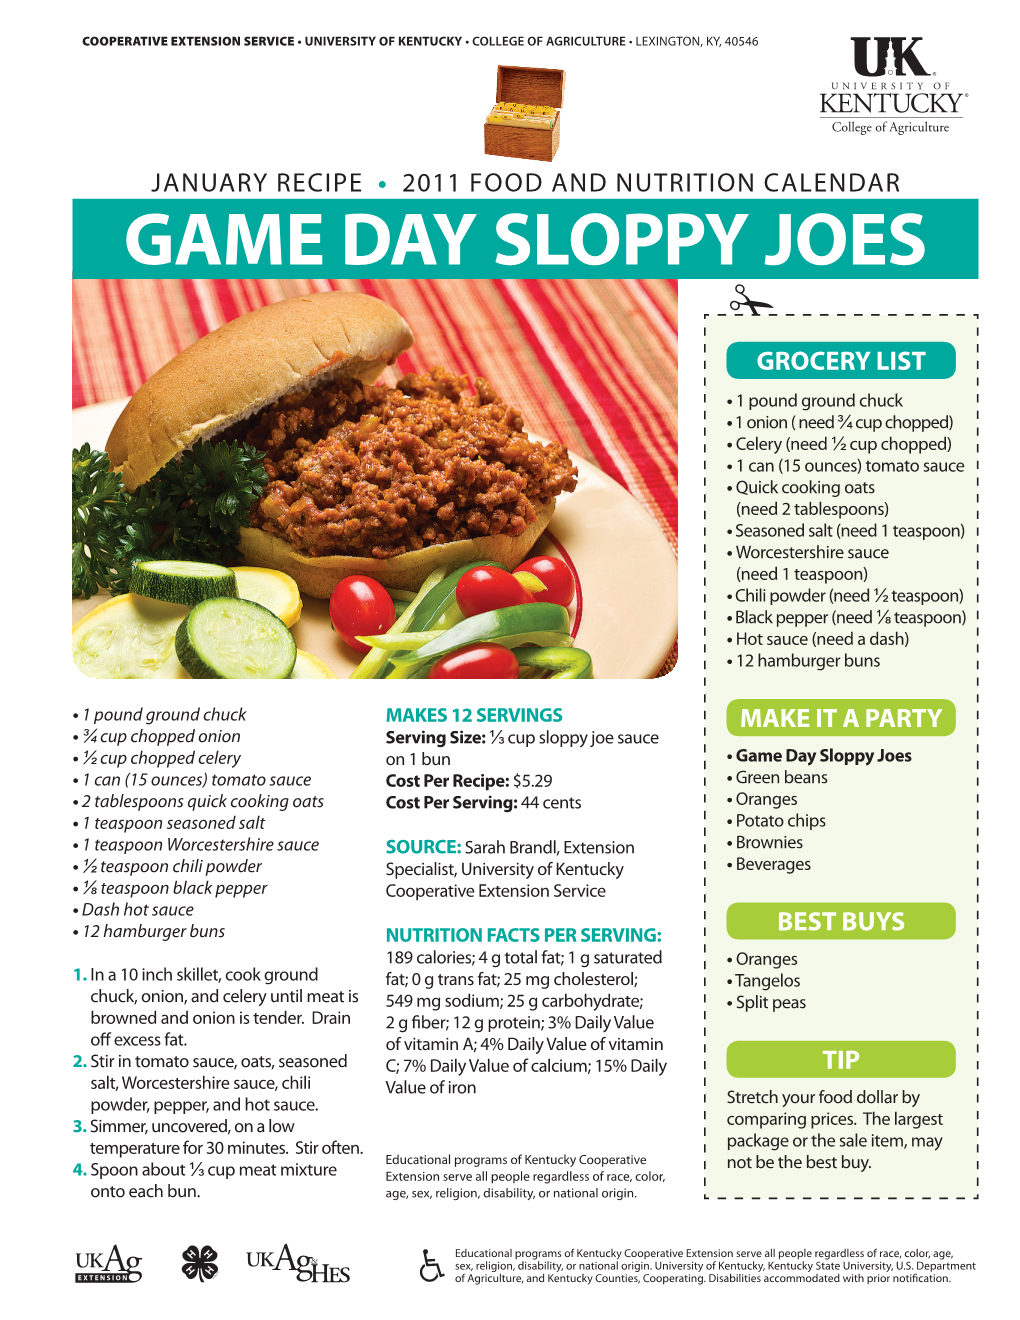 Game Day Sloppy Joes